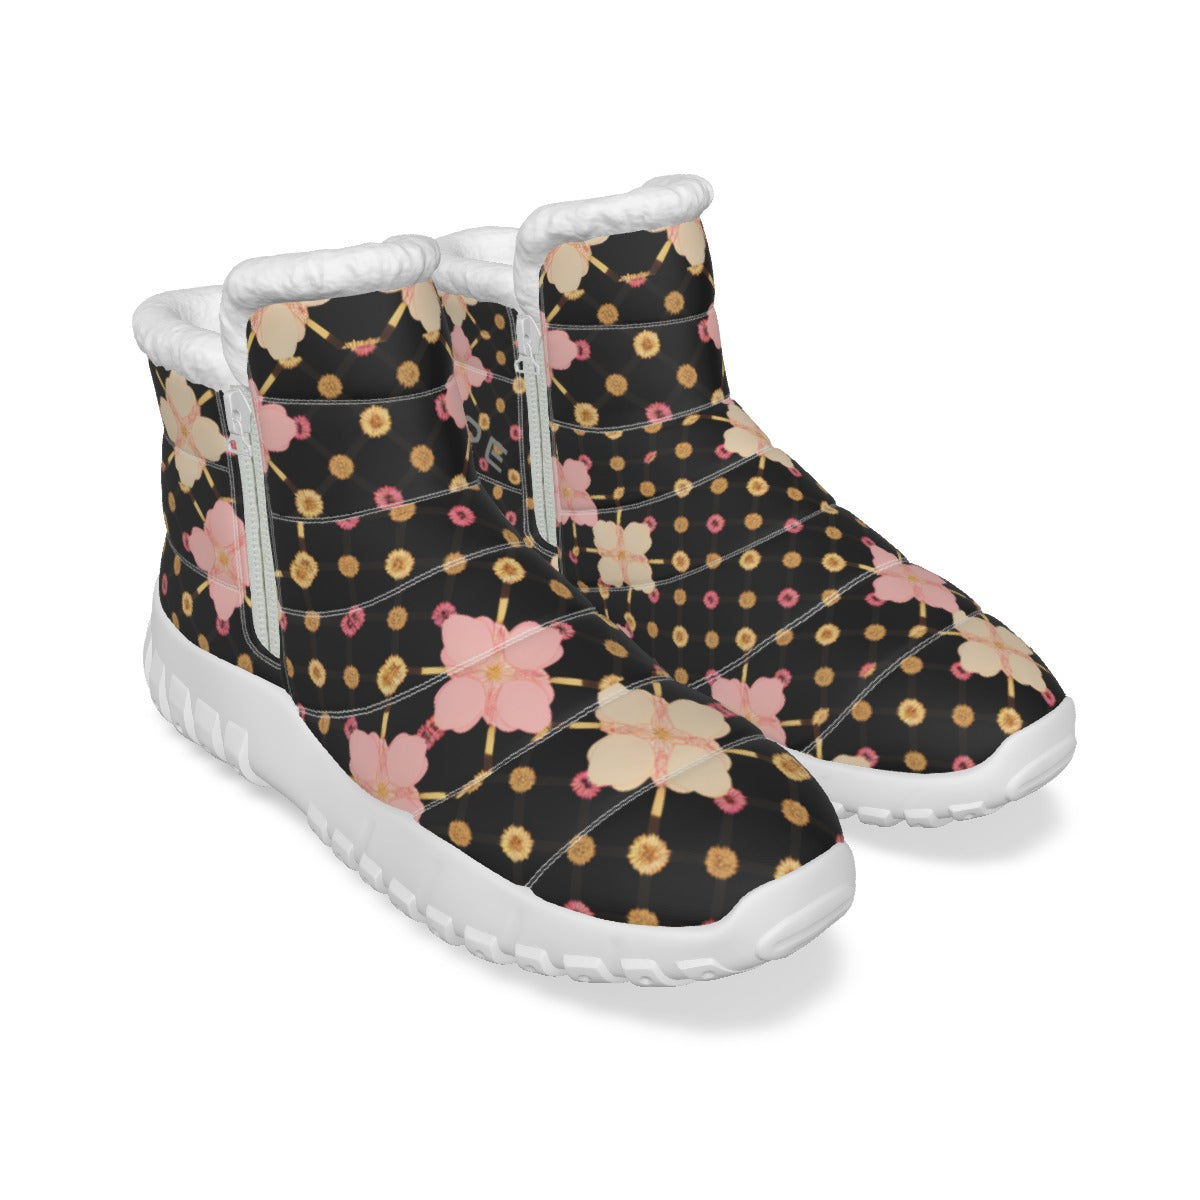 AC KAMI  OUPE "SUPER COMFORTABLE' Women's Zip-up Snow Boots